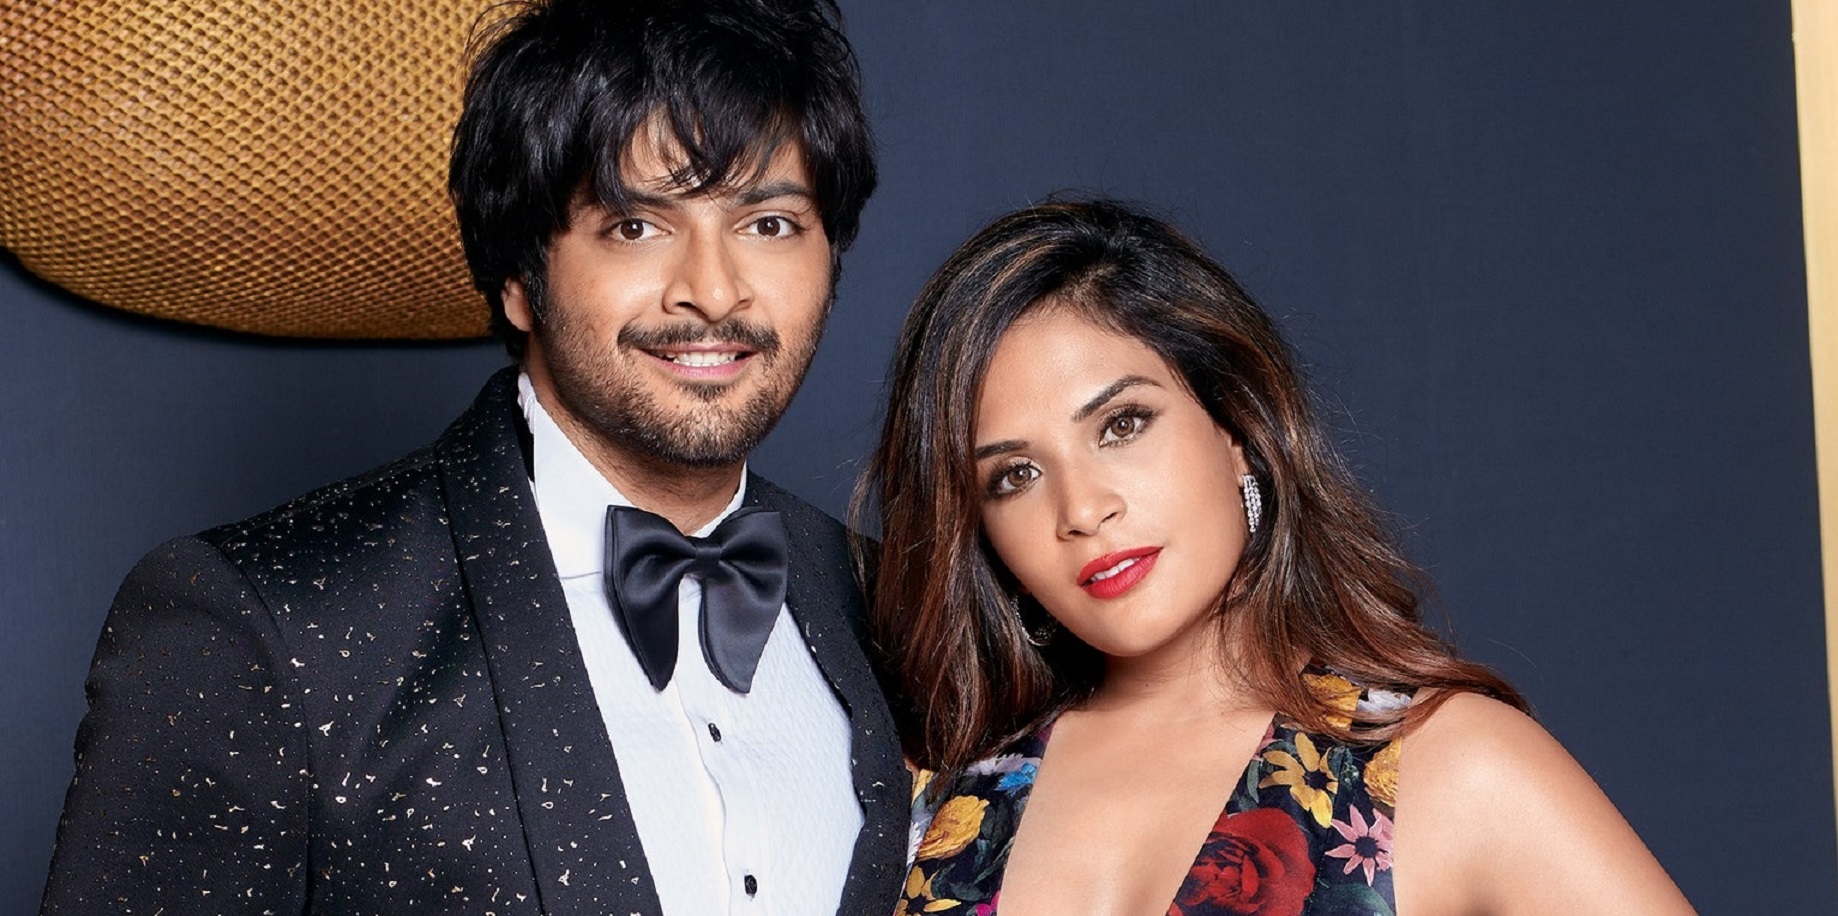 Richa Chadha & Ali Fazal Getting Married NEXT MONTH After Dating For 7 Years